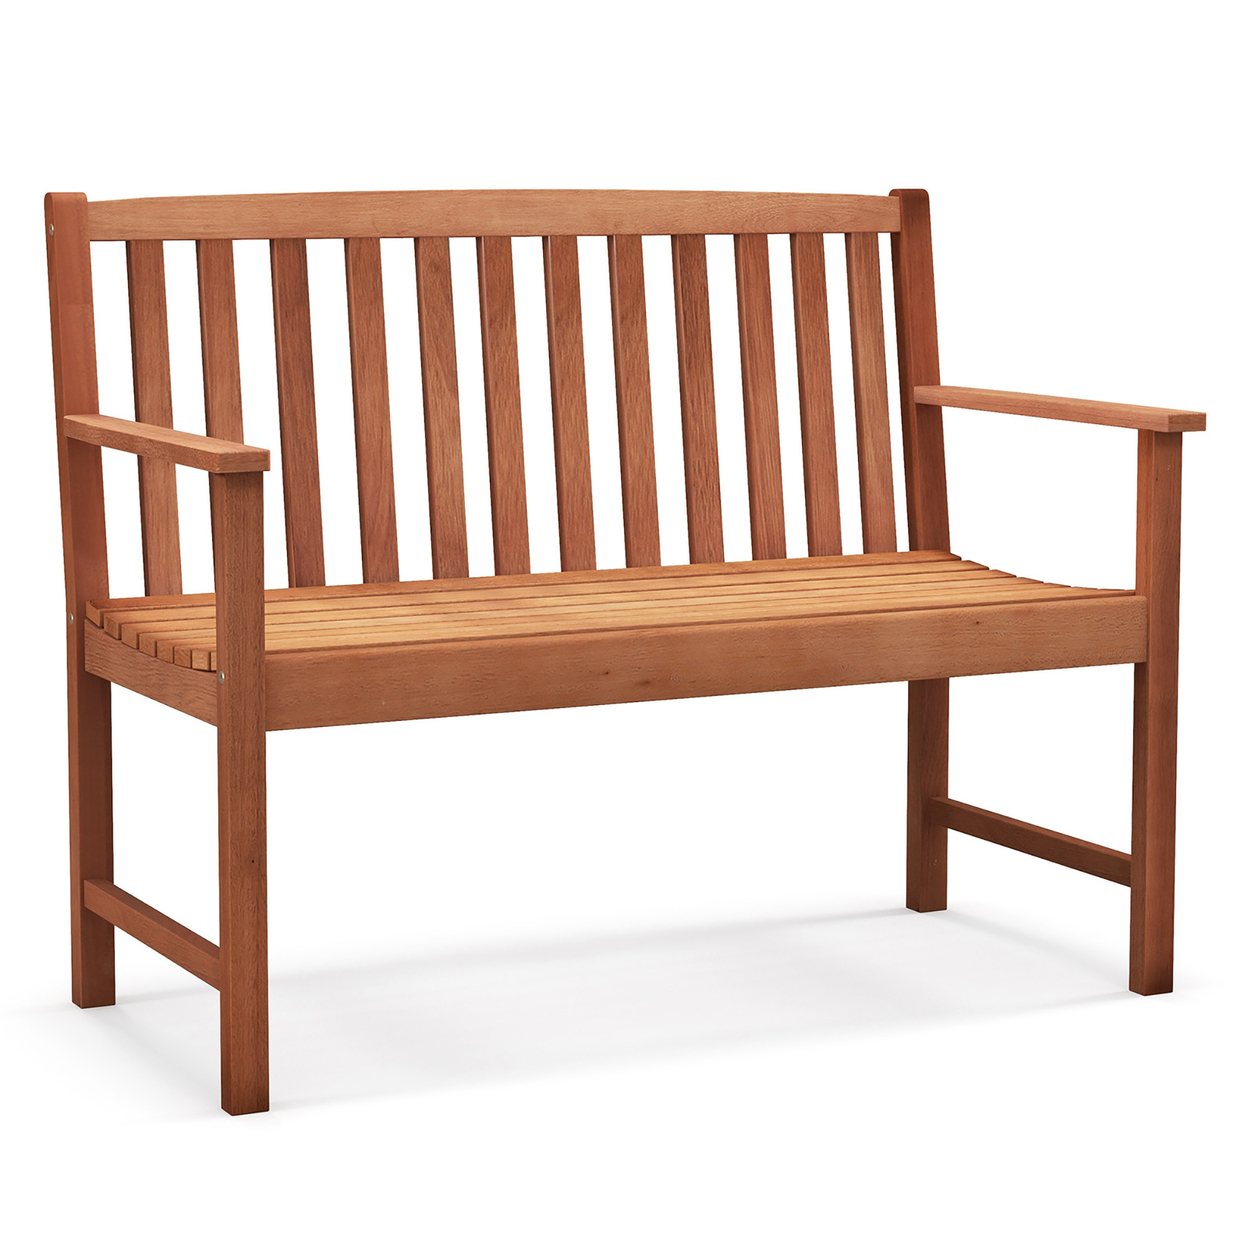 Patio Wood Bench 2-Seat Outdoor Bench W/ Cozy Armrests & Backrest